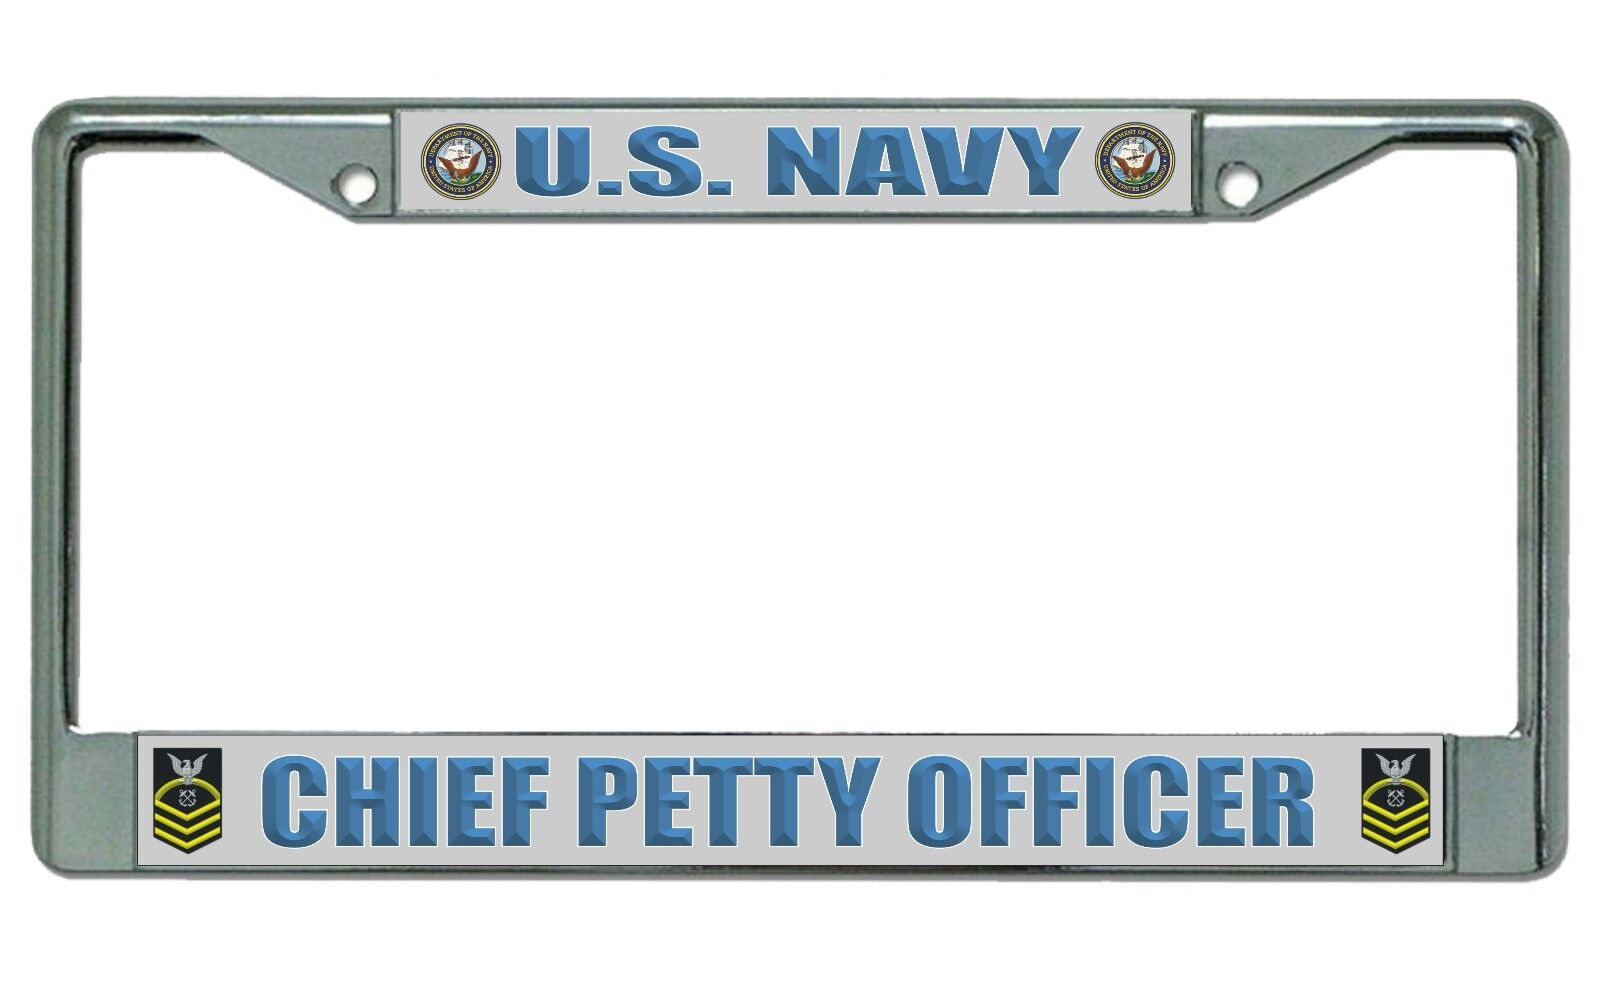 NAVY CHIEF PETTY OFFICER USA MADE MILITARY LICENSE PLATE FRAME 